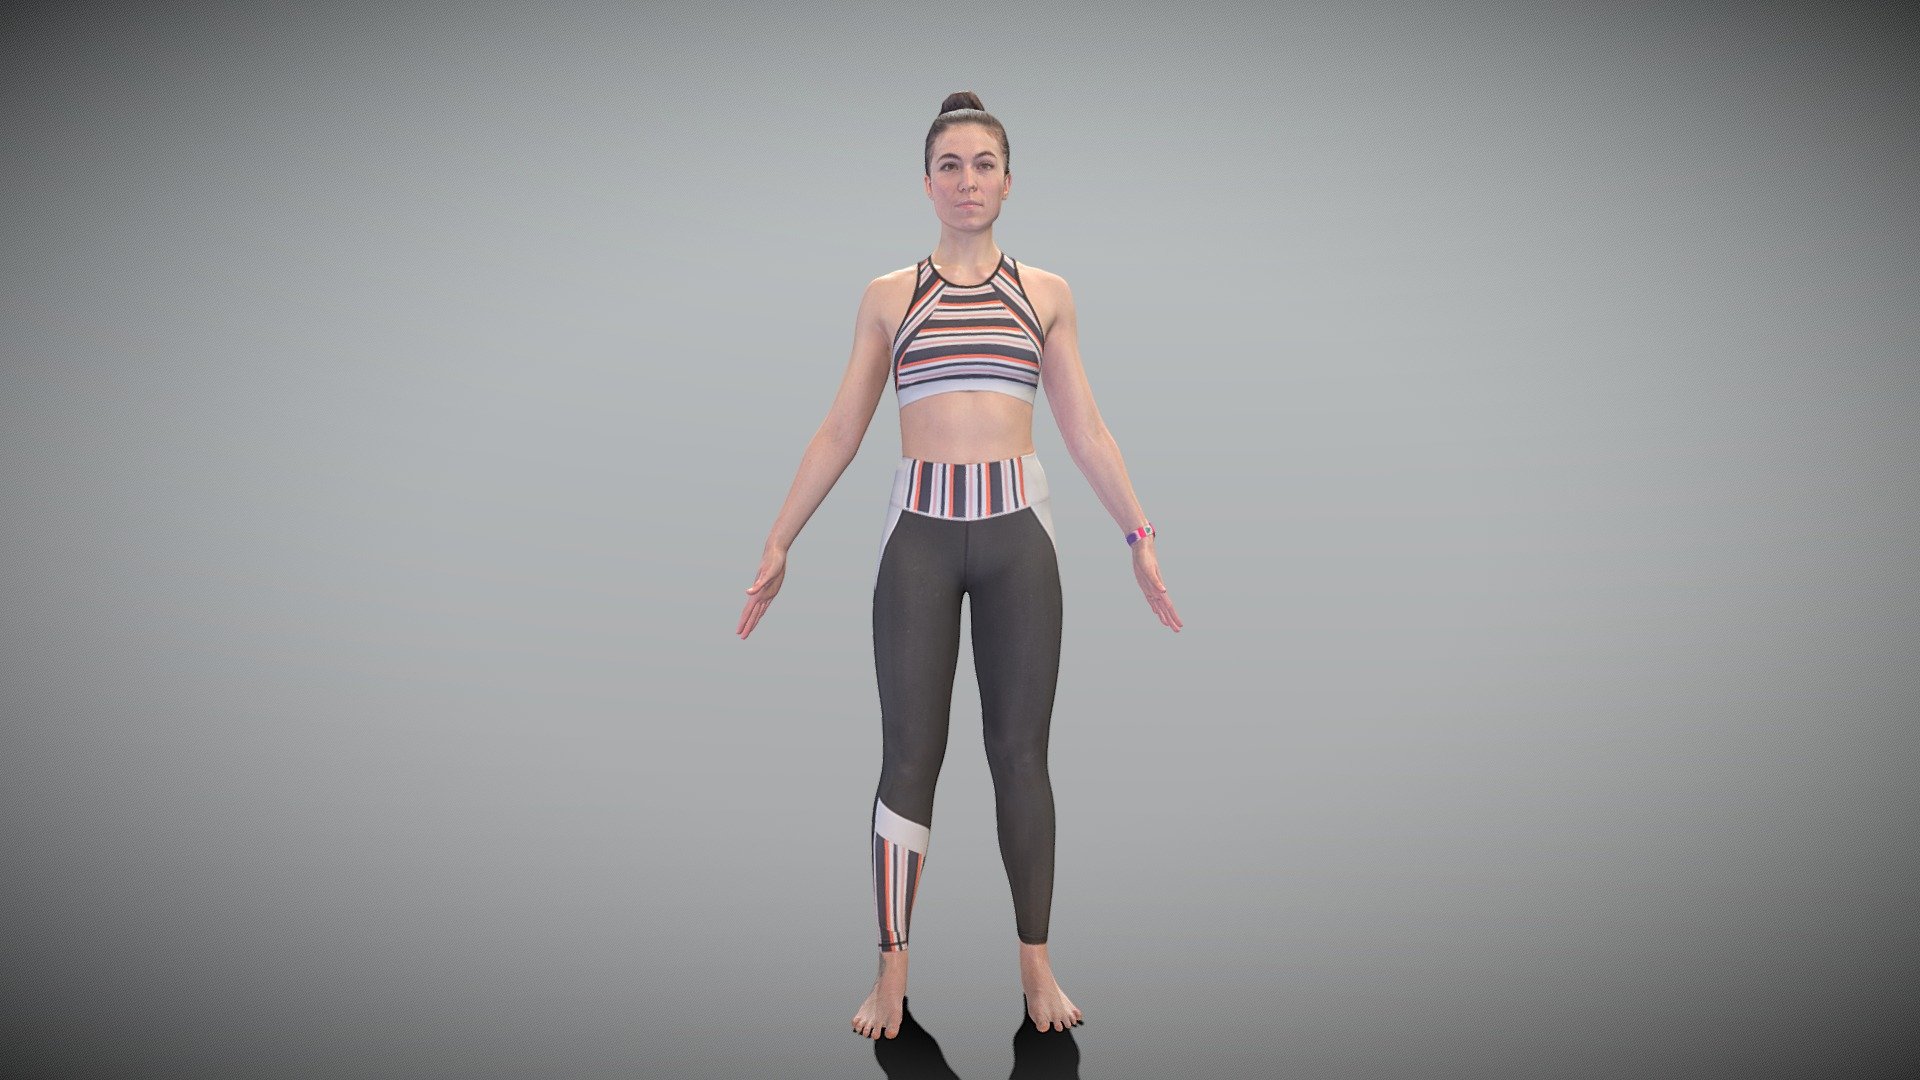 This is a true human size detailed model of a beautiful young woman of Caucasian appearance dressed in sportswear. The model is captured in the A-pose with mesh ready for rigging and animation in all most usable 3d software.

Technical specifications:




digital double scan model

low-poly model

high-poly model (.ztl tool with 5-6 subdivisions) clean and retopologized automatically via ZRemesher

fully quad topology

sufficiently clean

edge Loops based

ready for subdivision

8K texture color map

non-overlapping UV map

ready for animation

PBR textures 8K resolution: Normal, Displacement, Albedo maps

Download package includes a Cinema 4D project file with Redshift shader, OBJ, FBX, STL files, which are applicable for 3ds Max, Maya, Unreal Engine, Unity, Blender, etc. All the textures you will find in the “Tex” folder, included into the main archive.

3D EVERYTHING

Stand with Ukraine! - Fitness woman ready for animation 454 - Buy Royalty Free 3D model by deep3dstudio 3d model